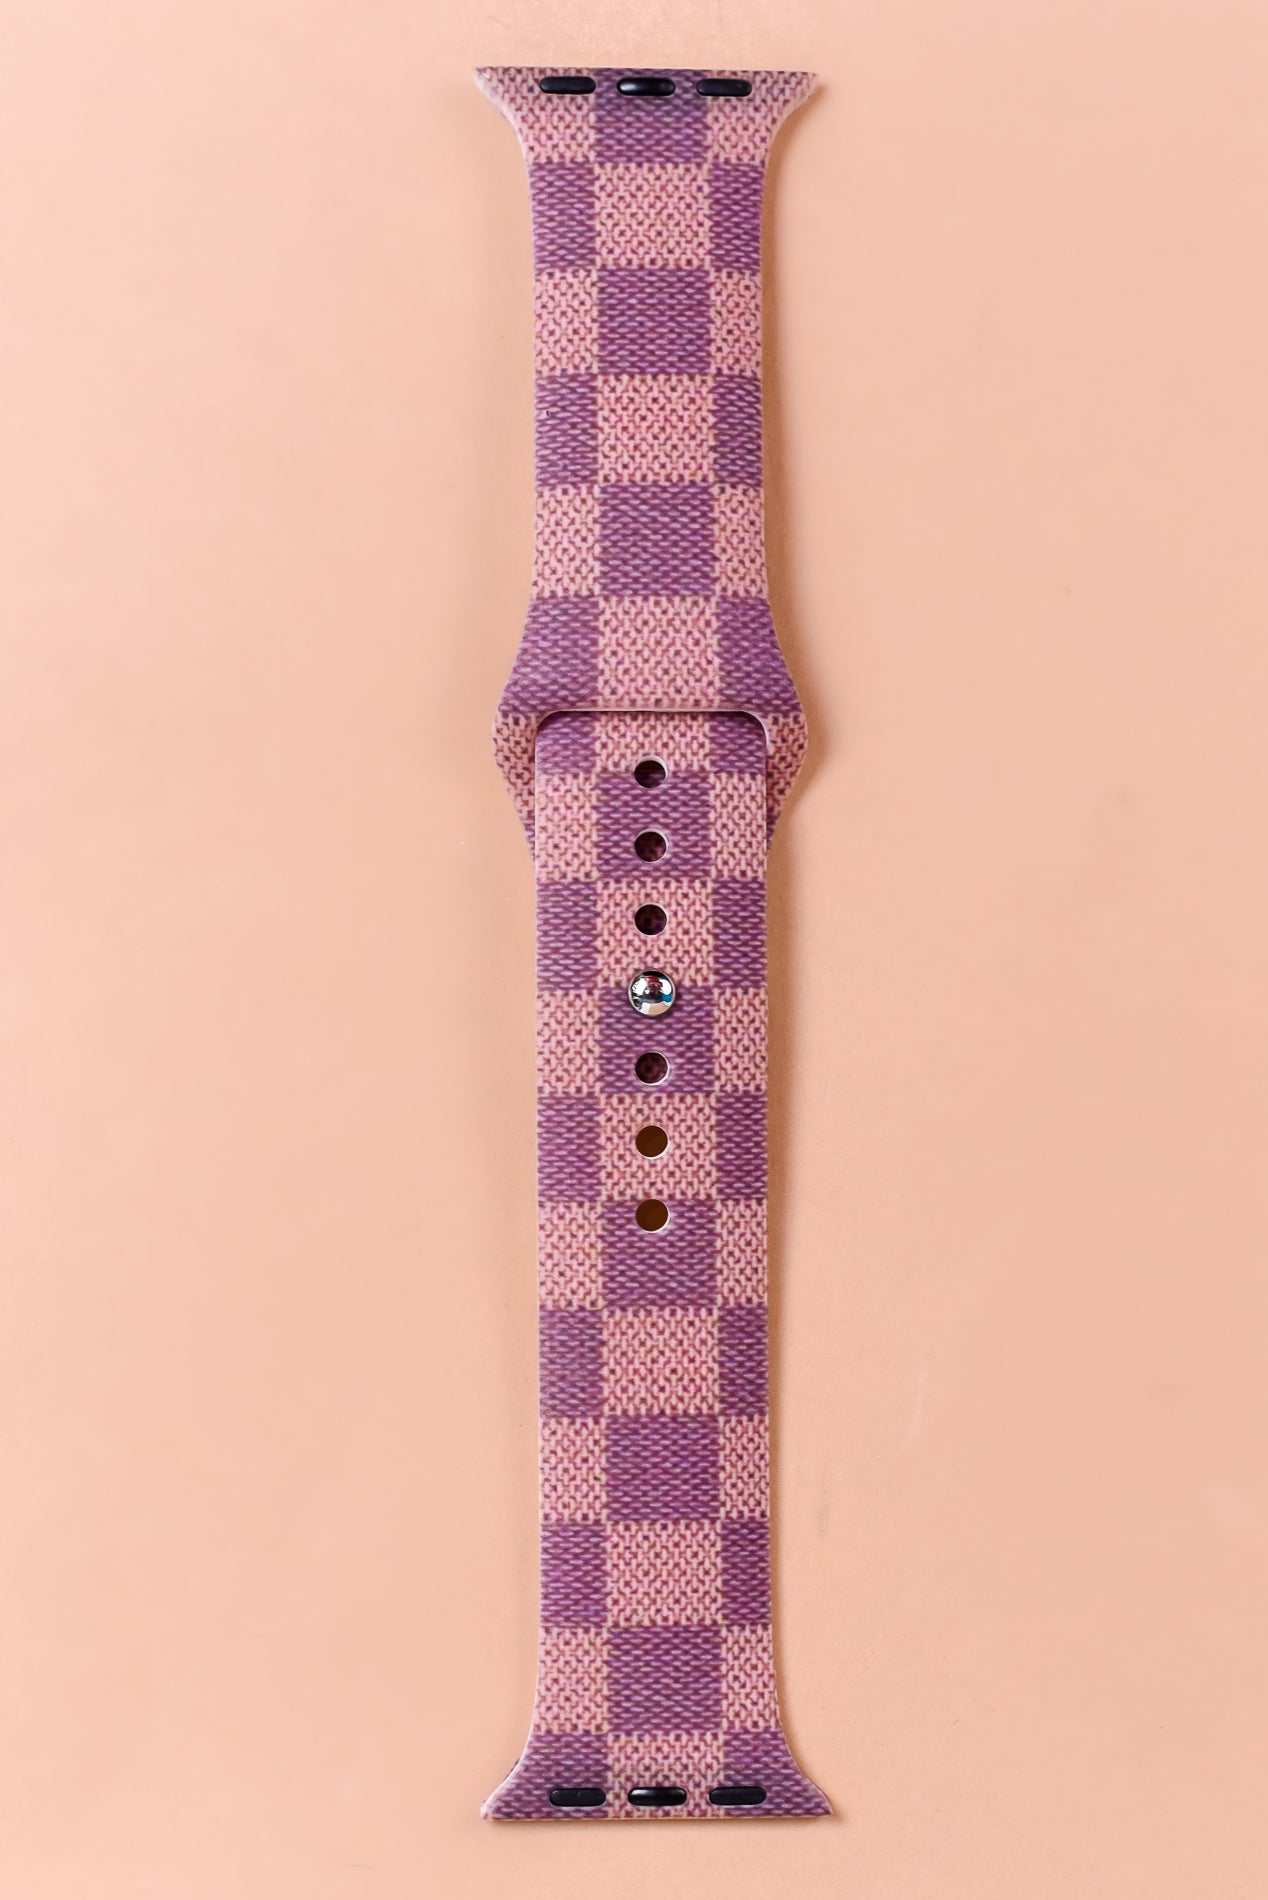 Brown Checkered Apple Watch Band - WB021BR